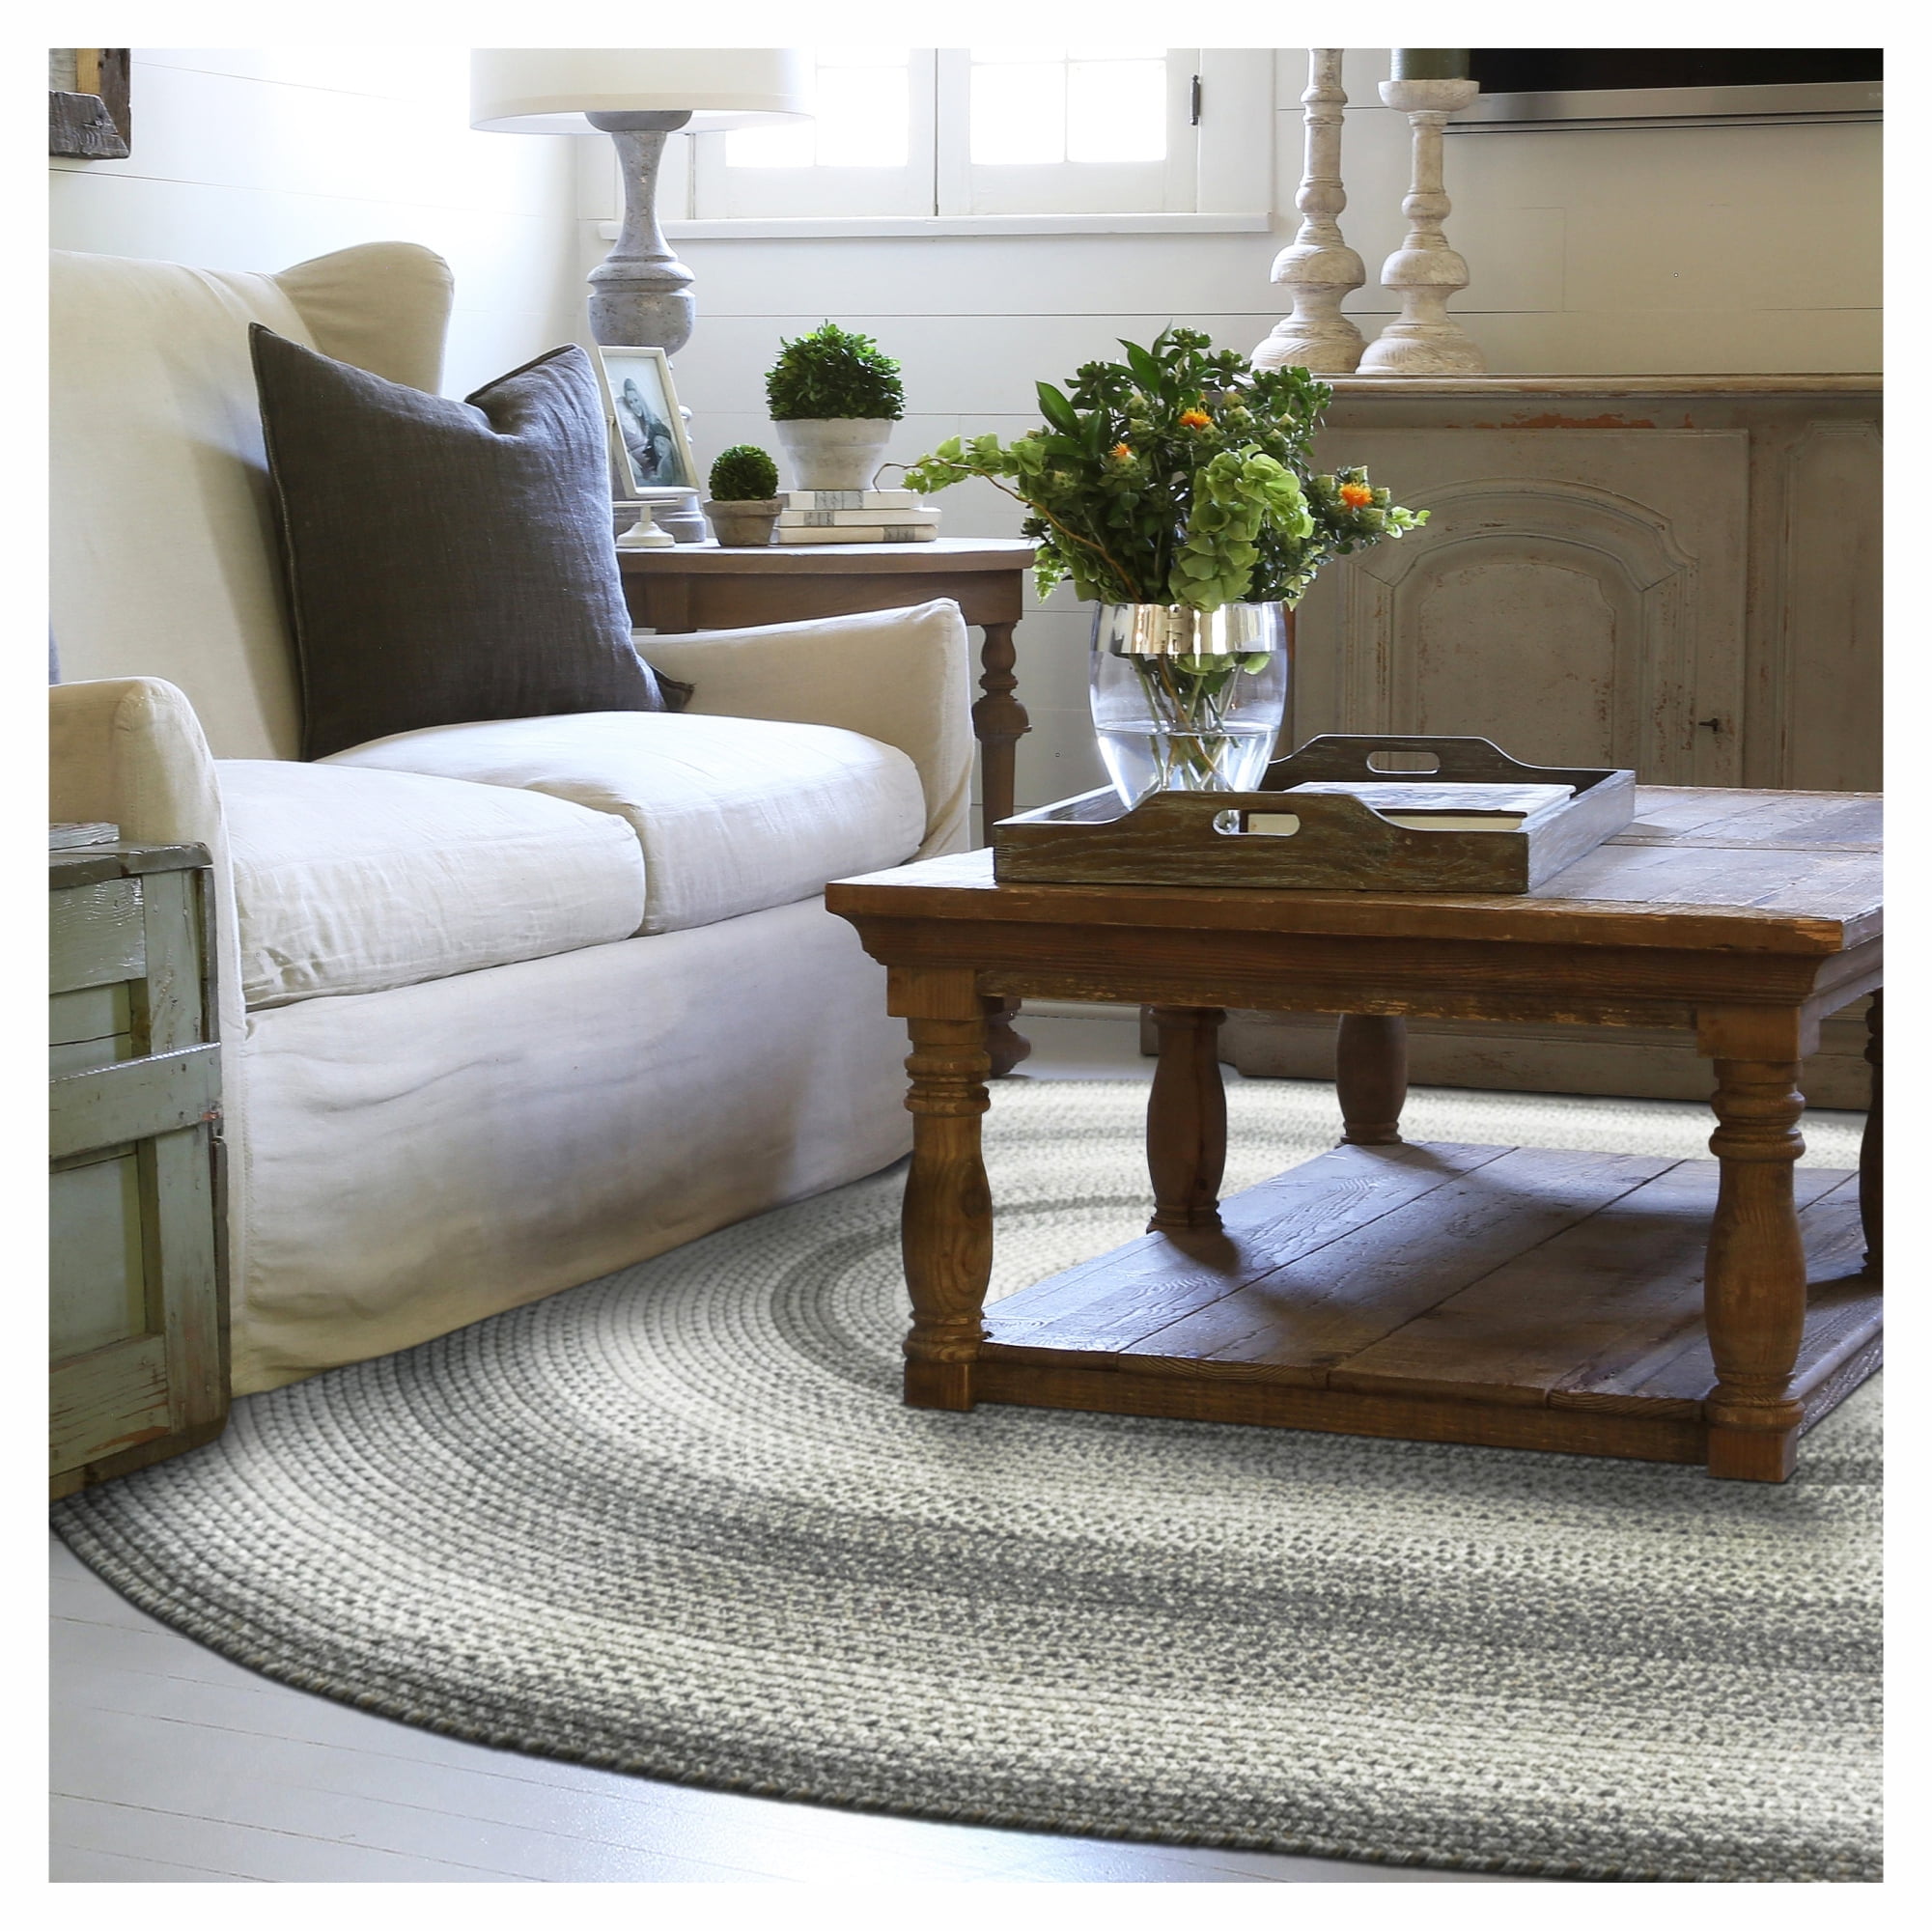 Homespice Graphite Gray Braided Rug and Oval Rugs 6x9', Rustic